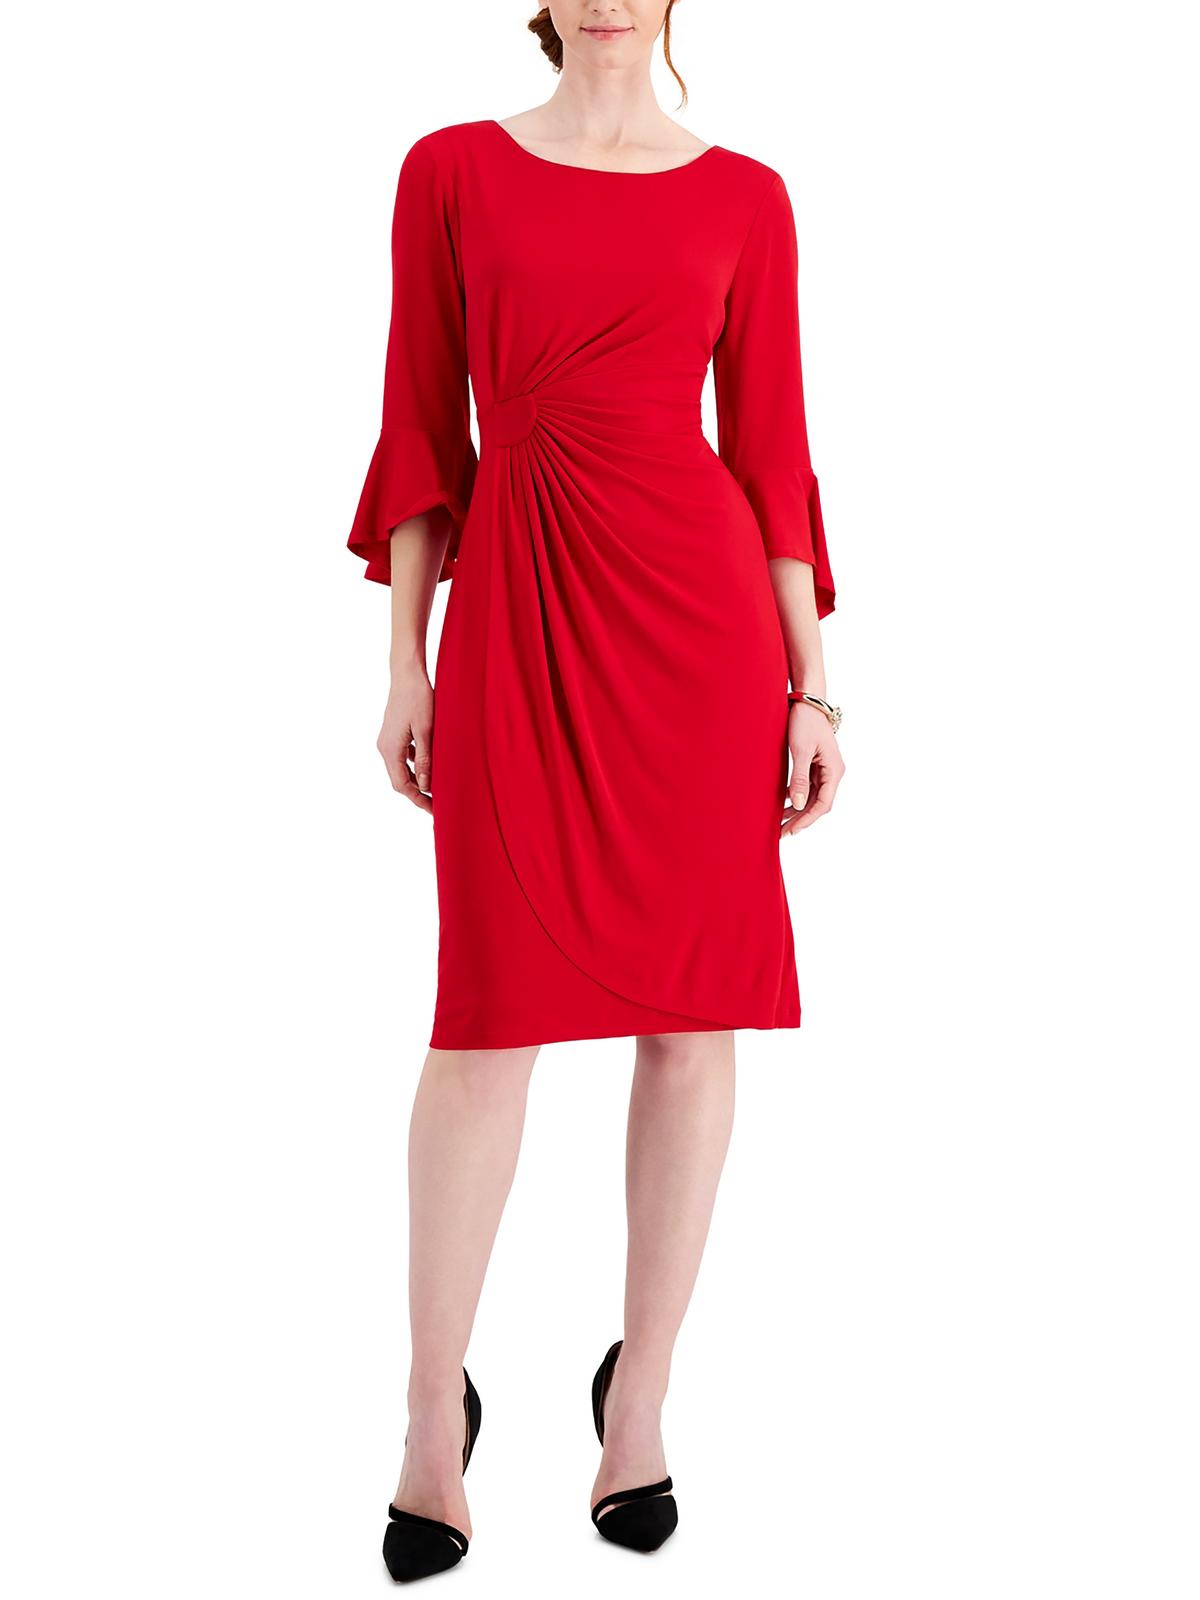 Shop Connected Apparel Petites Womens Ruched Bell Sleeves Cocktail Dress In Pink